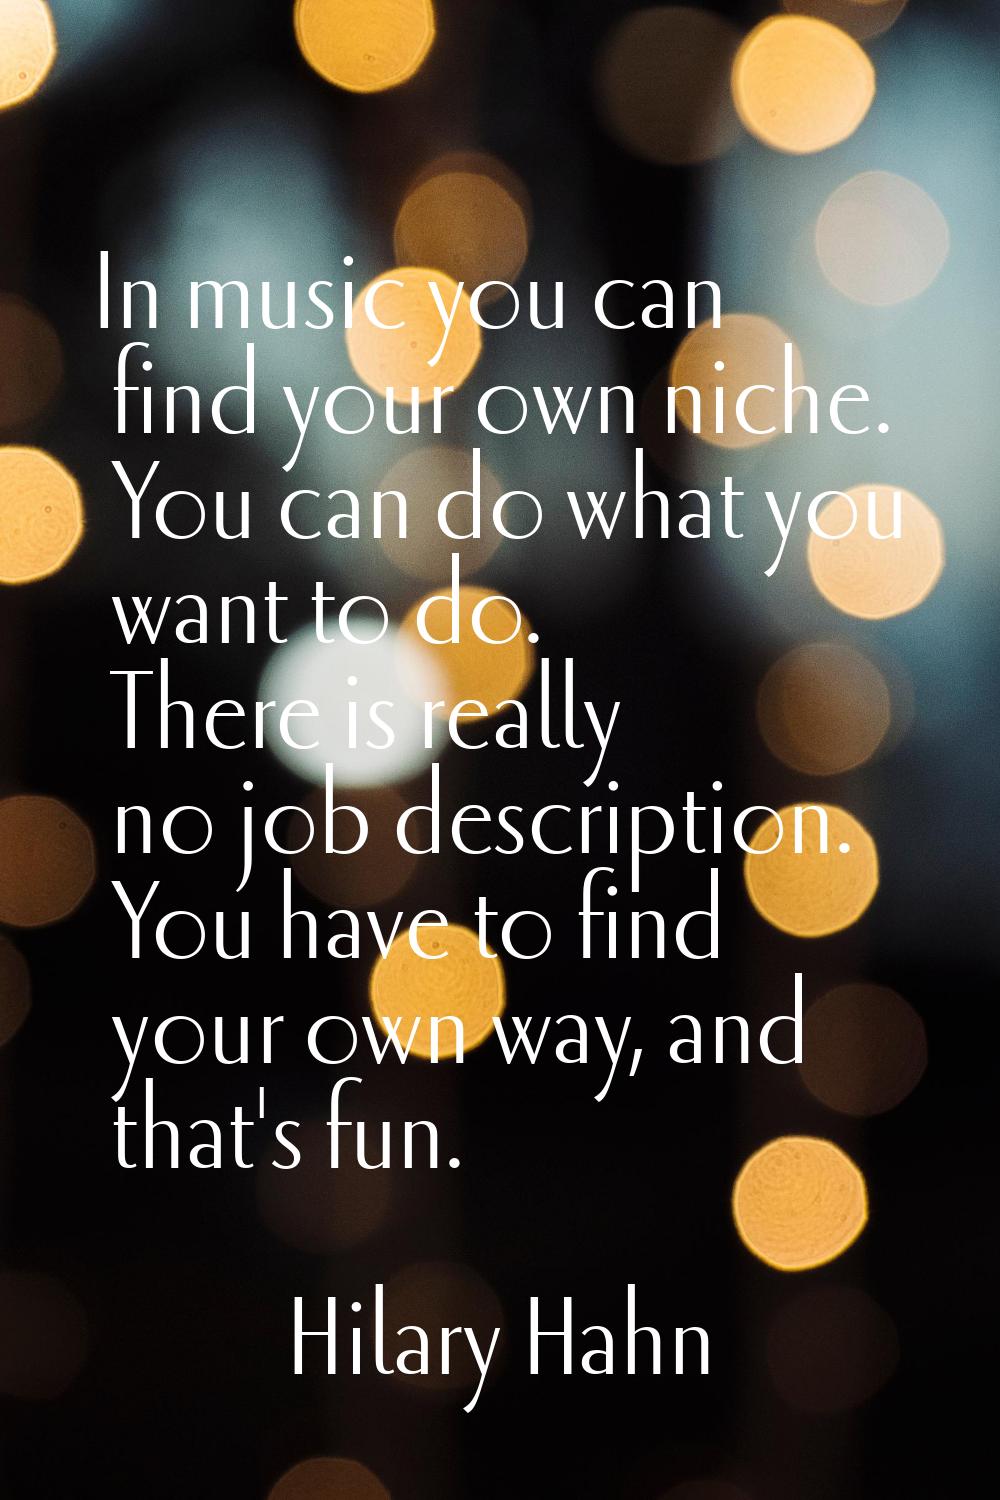 In music you can find your own niche. You can do what you want to do. There is really no job descri